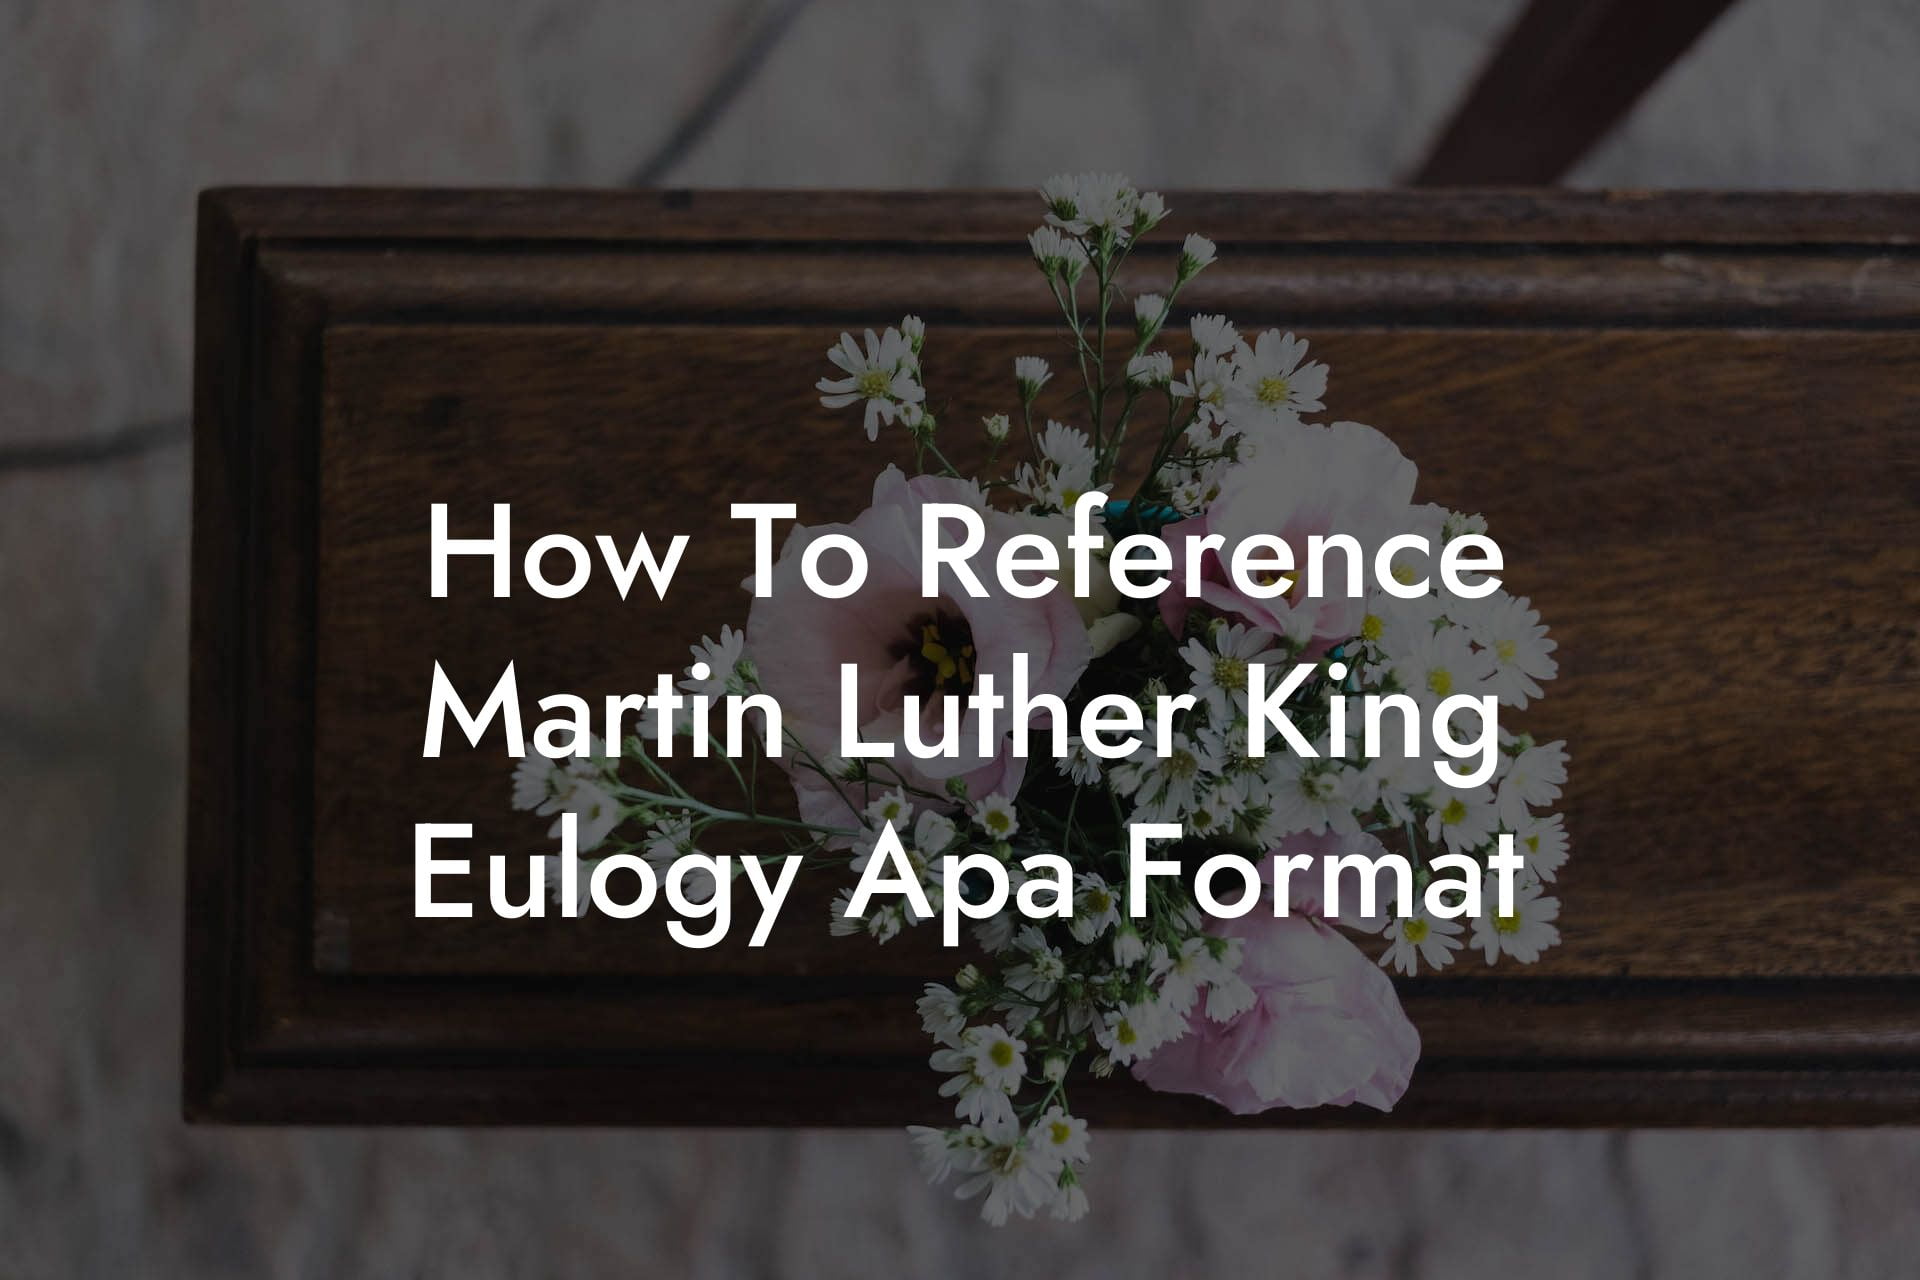 How To Reference Martin Luther King Eulogy Apa Format